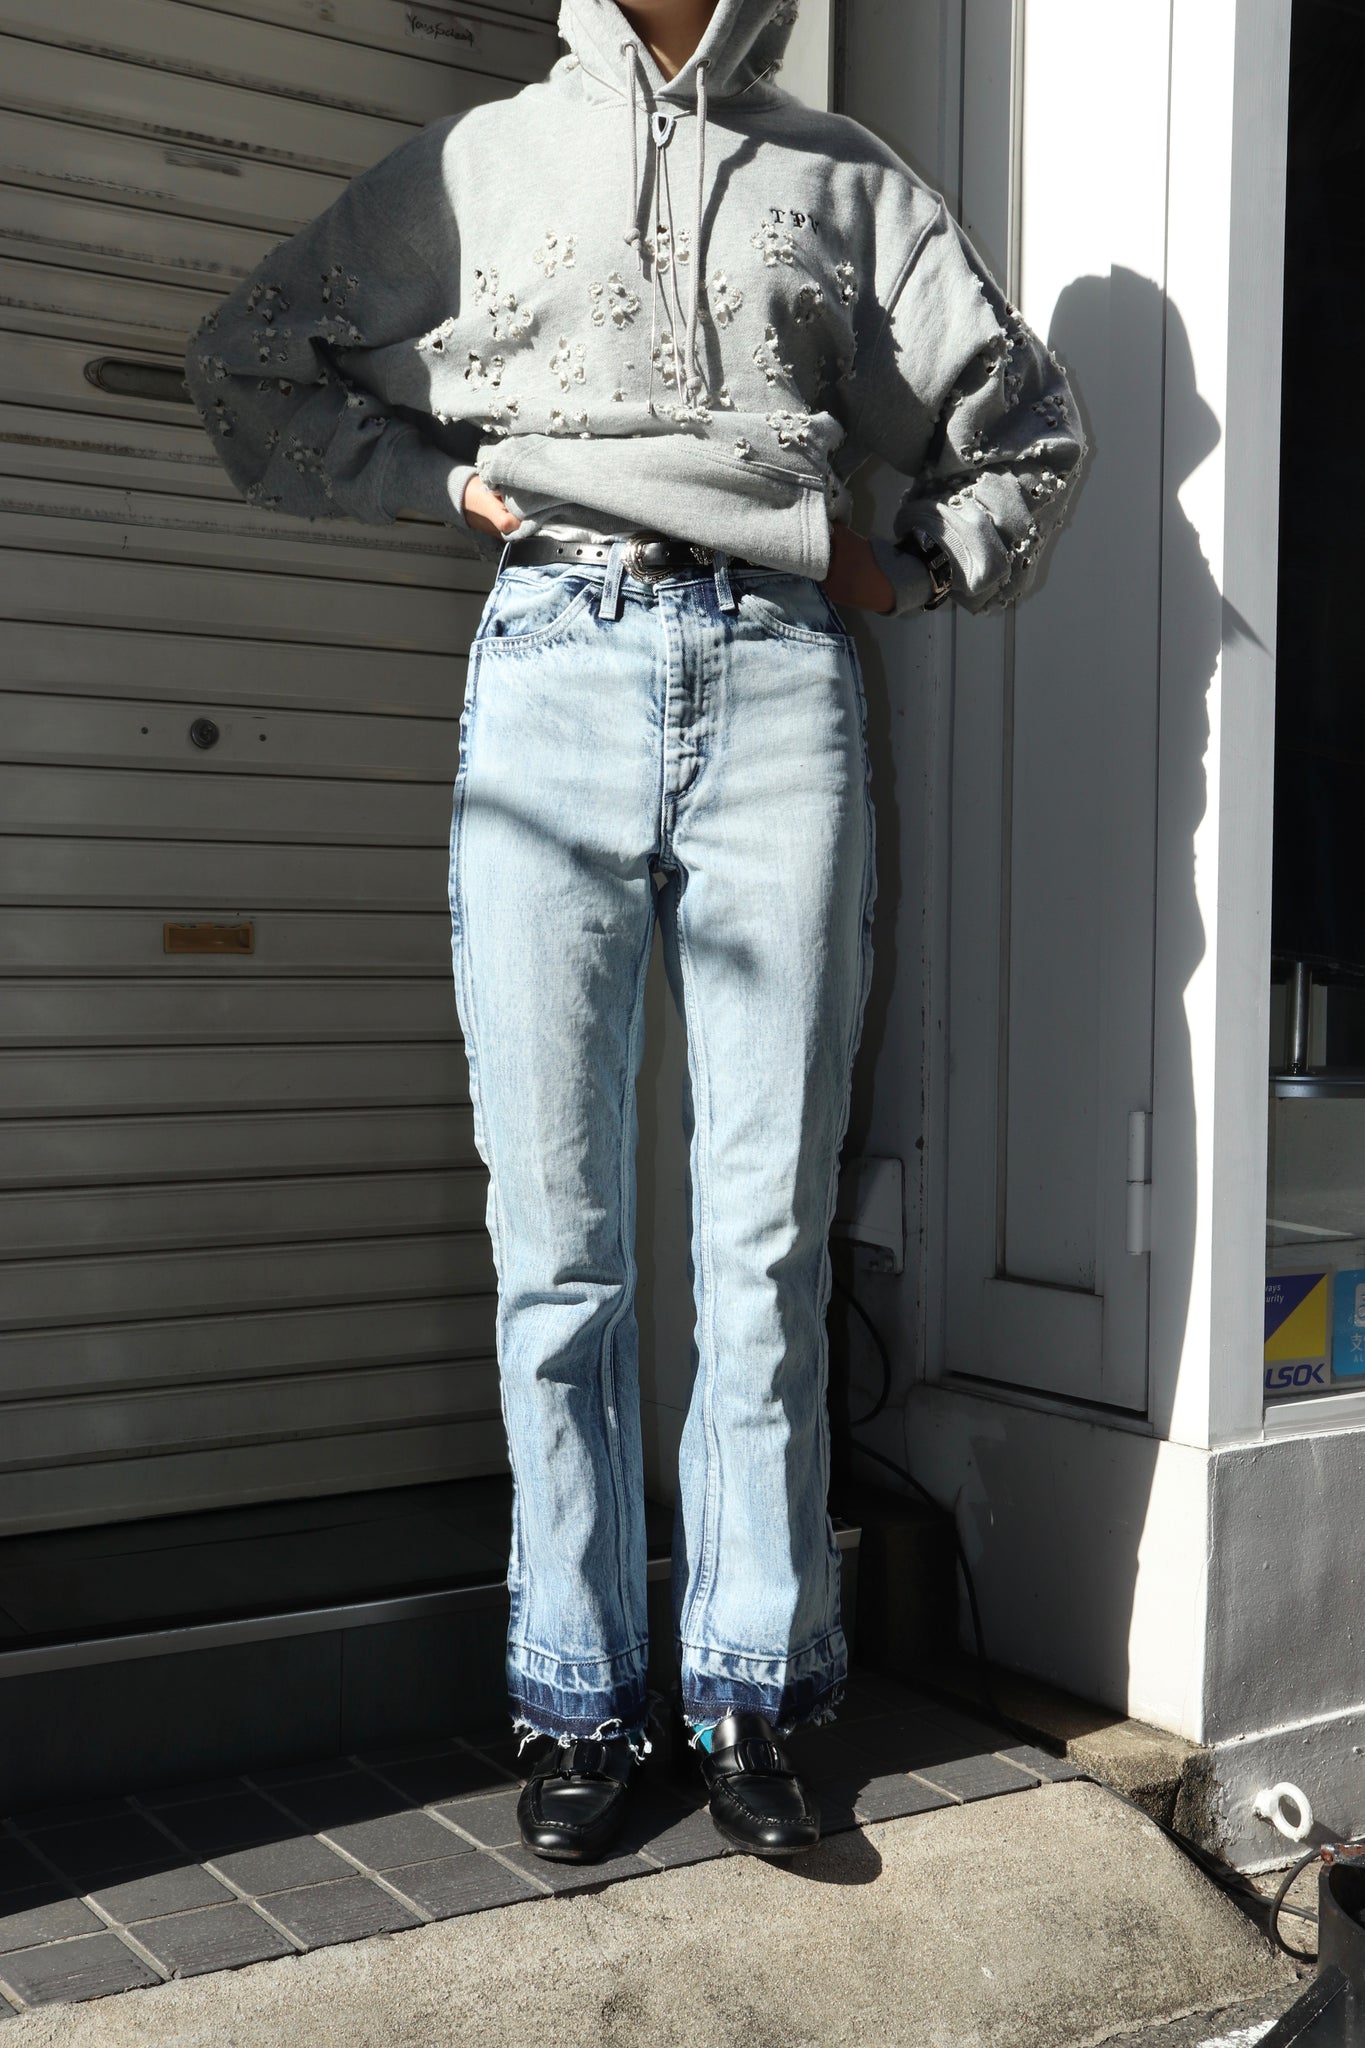 Wearing image of XS of BLK of DENIM PANTS 2 of TOGA's 23SS